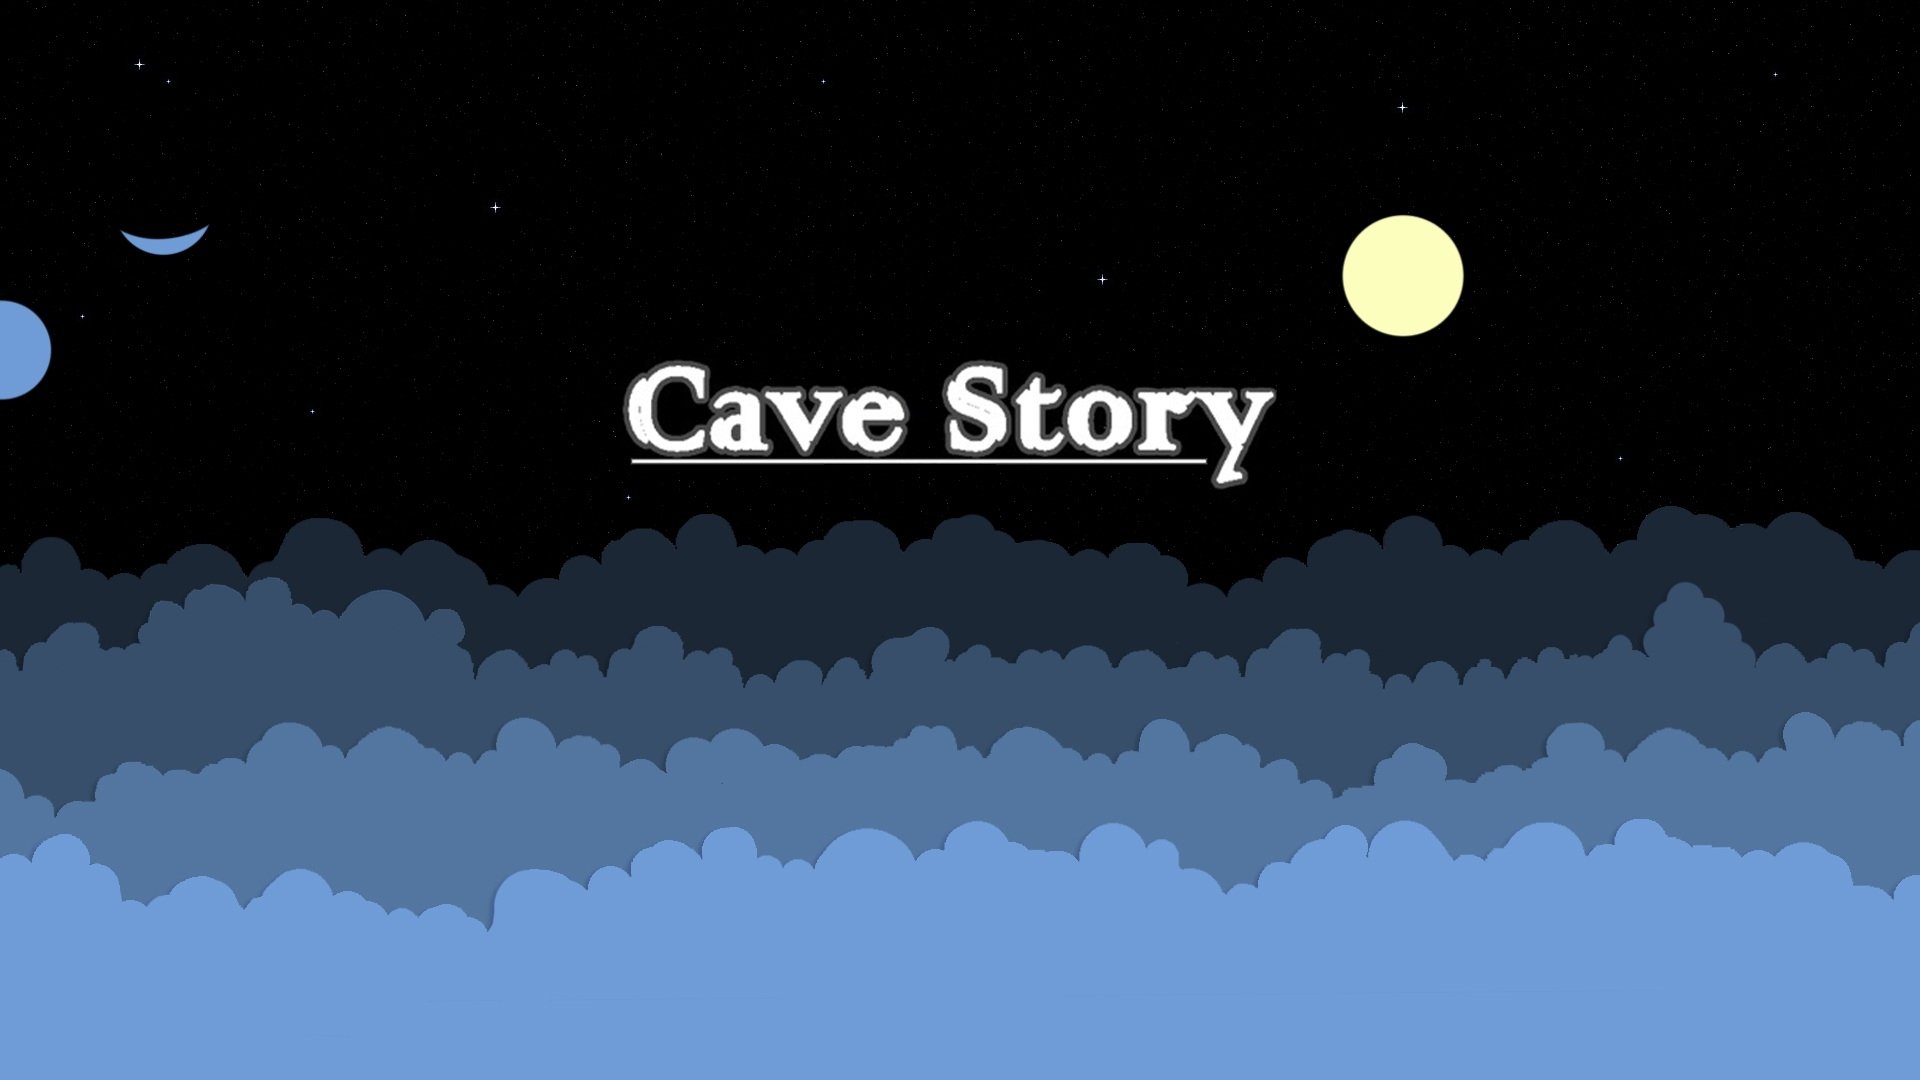 Cave Story Hd Wallpaper Background Image 1920x1080 Id 515329 Wallpaper Abyss